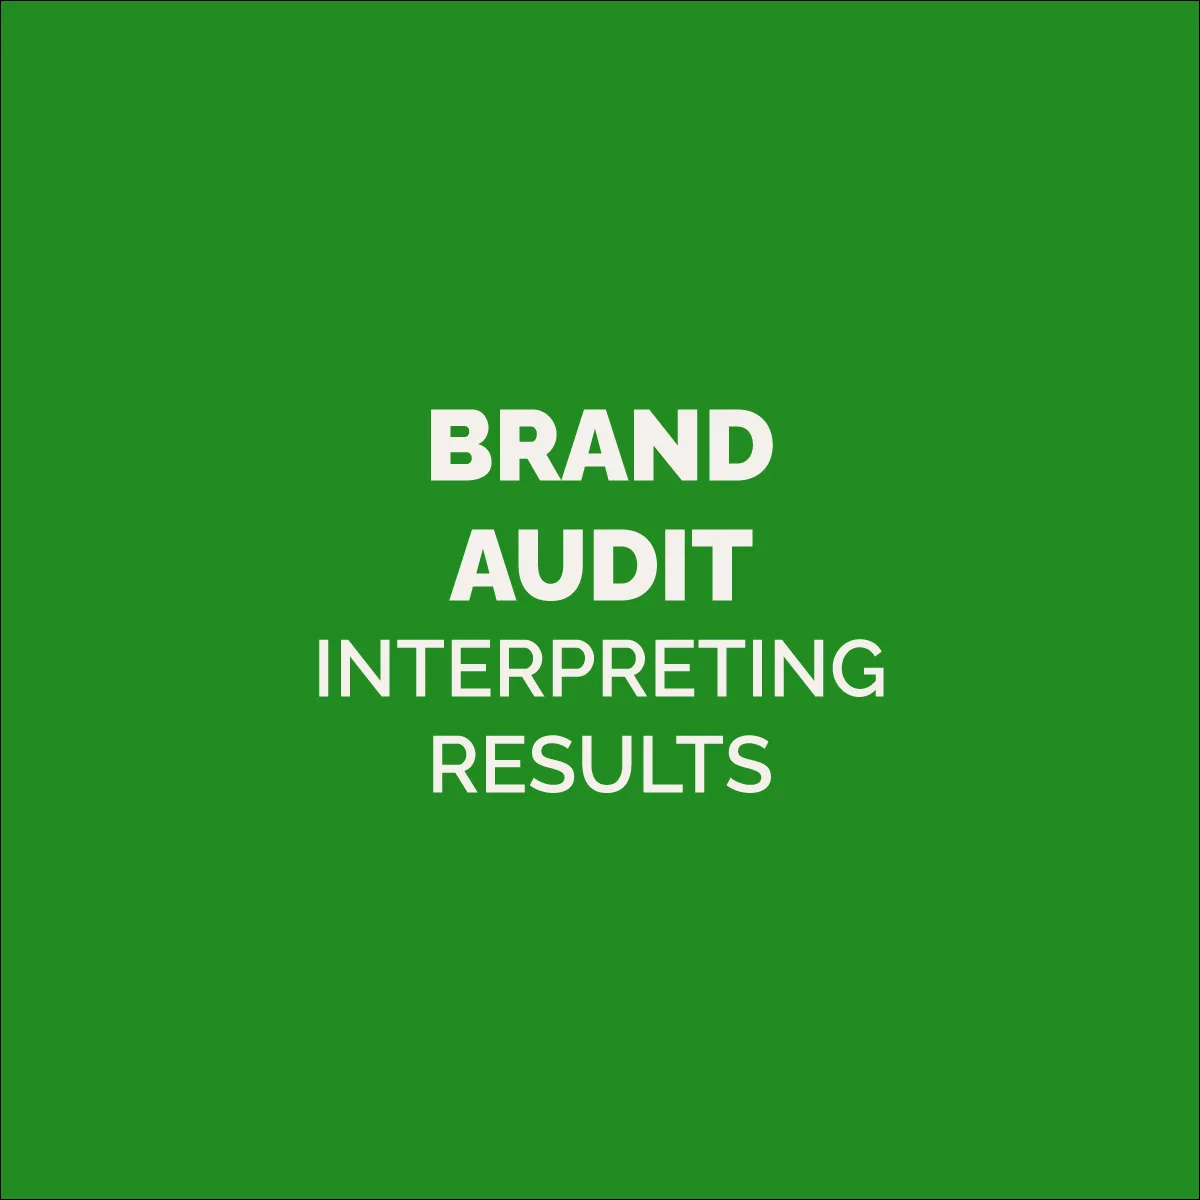 TIPS FOR MASTERING YOUR BRAND AUDIT RESULTS